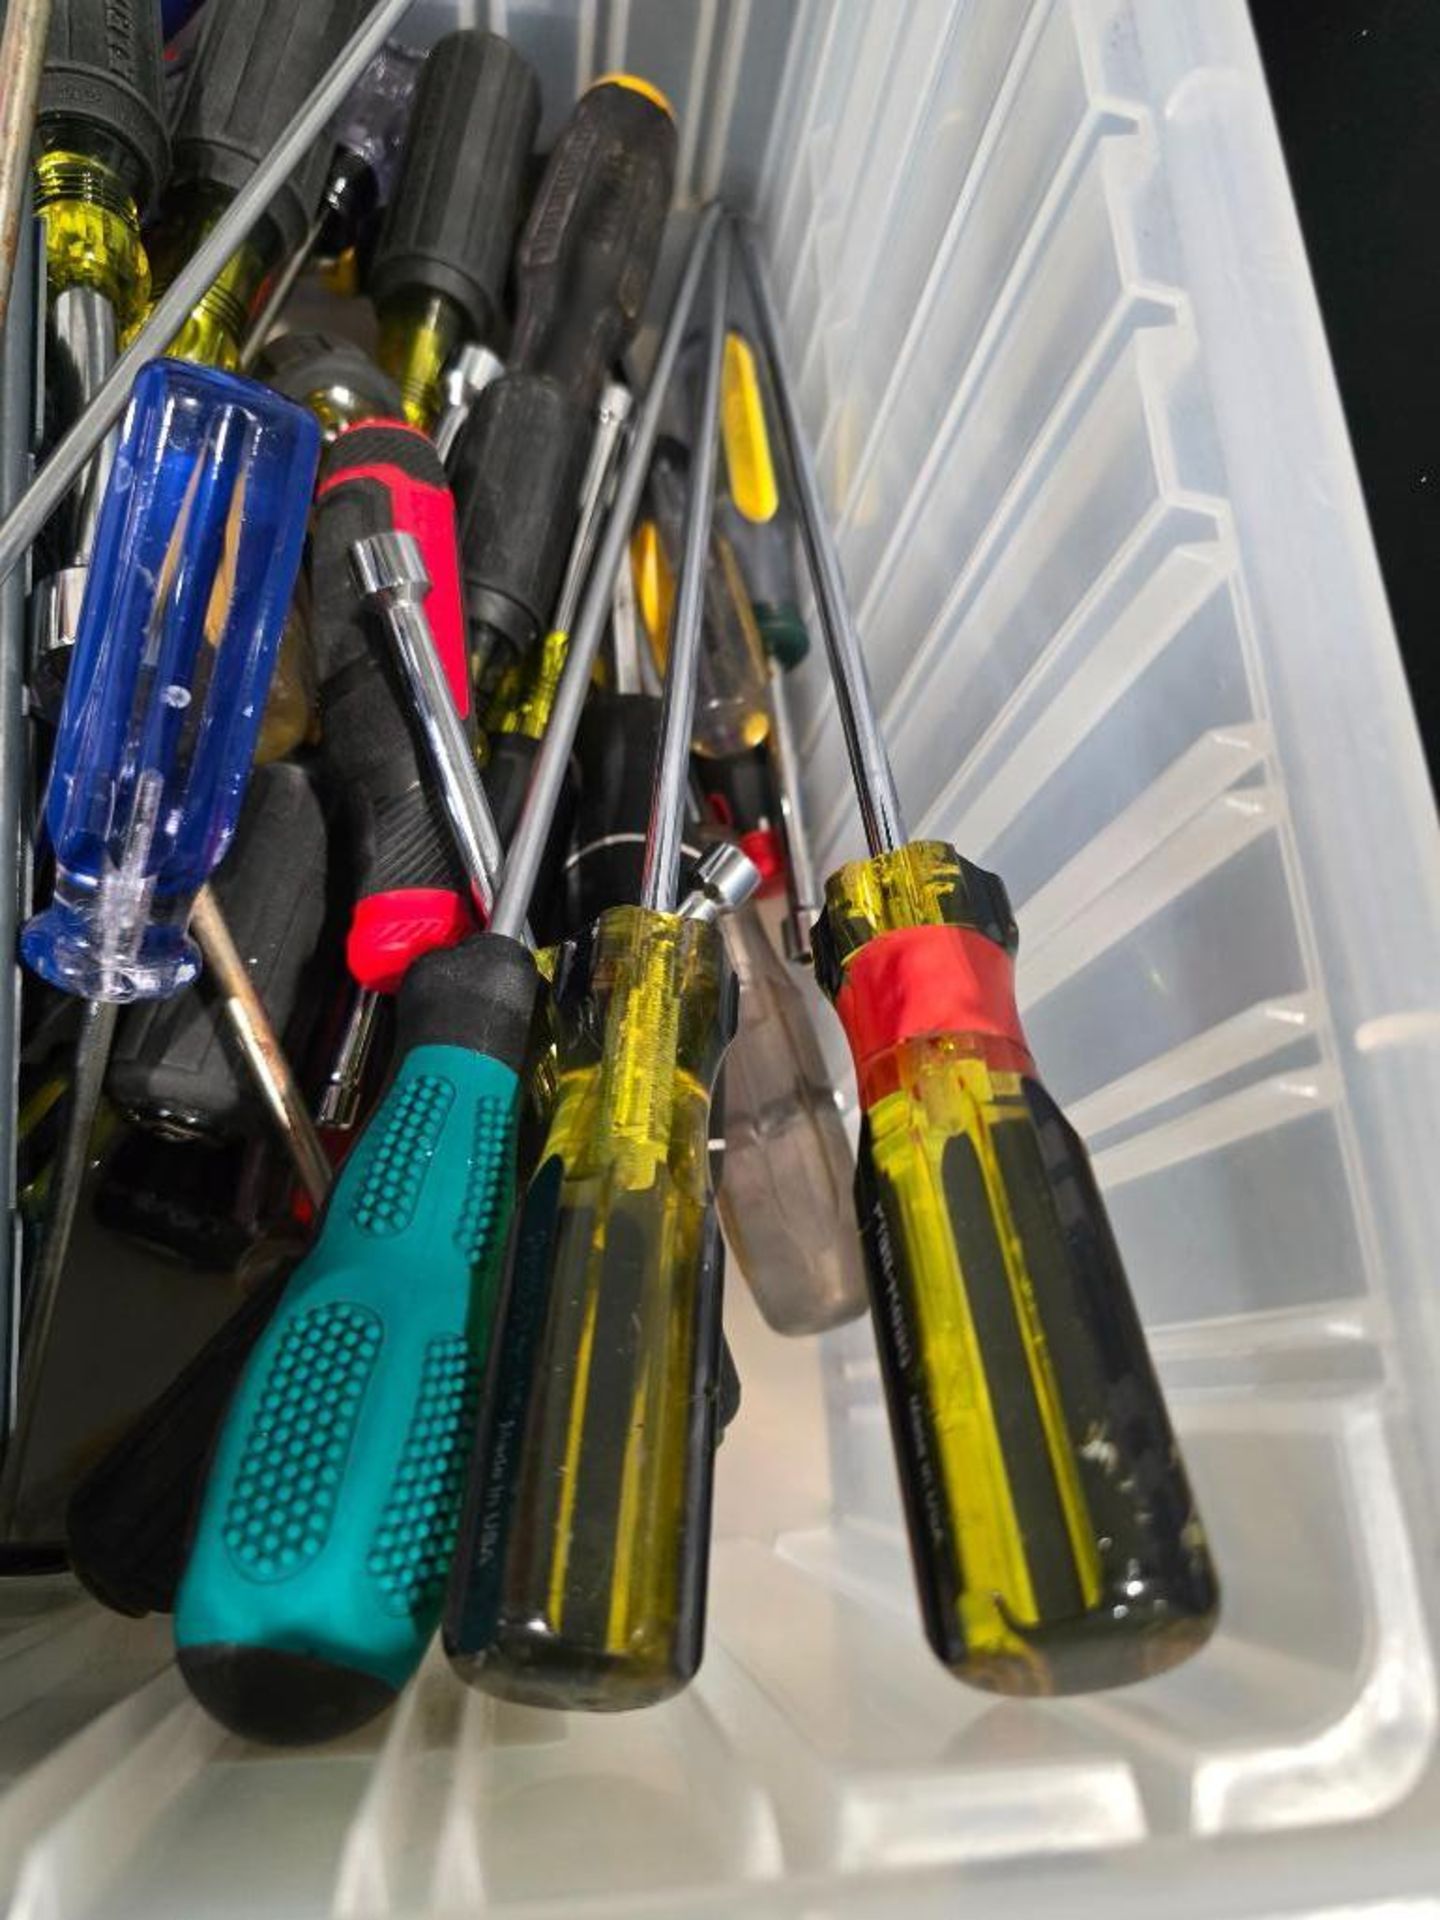 Tote of Screw Drivers & Nut Drivers - Image 7 of 7